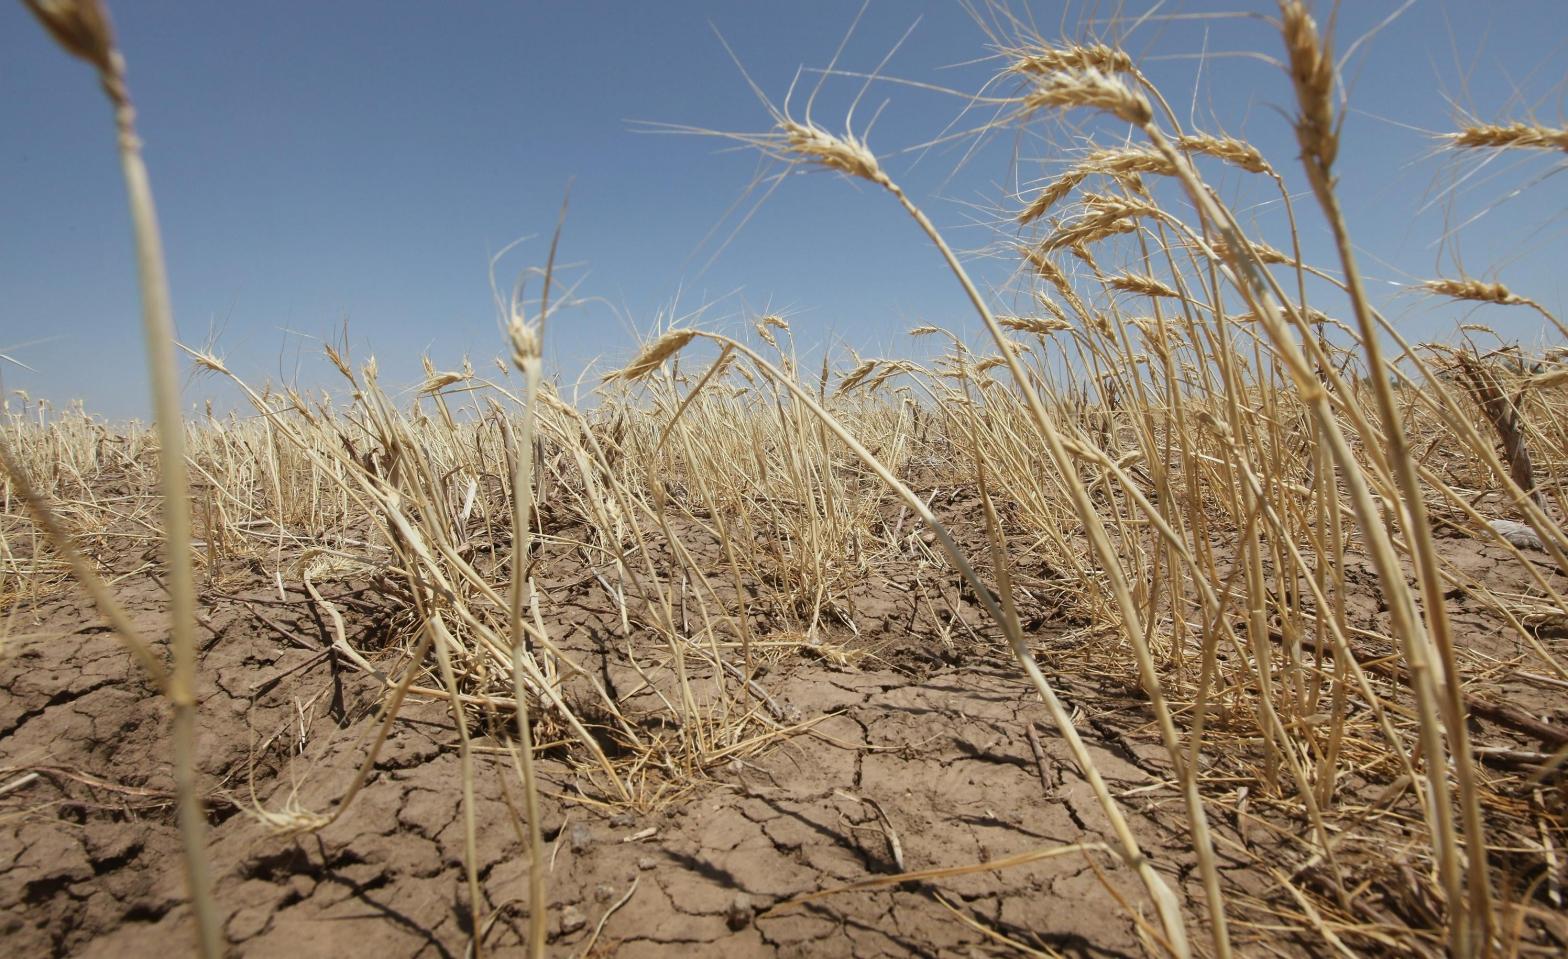 A wheat field in drought. (Photo: Scott Olson, Getty Images)